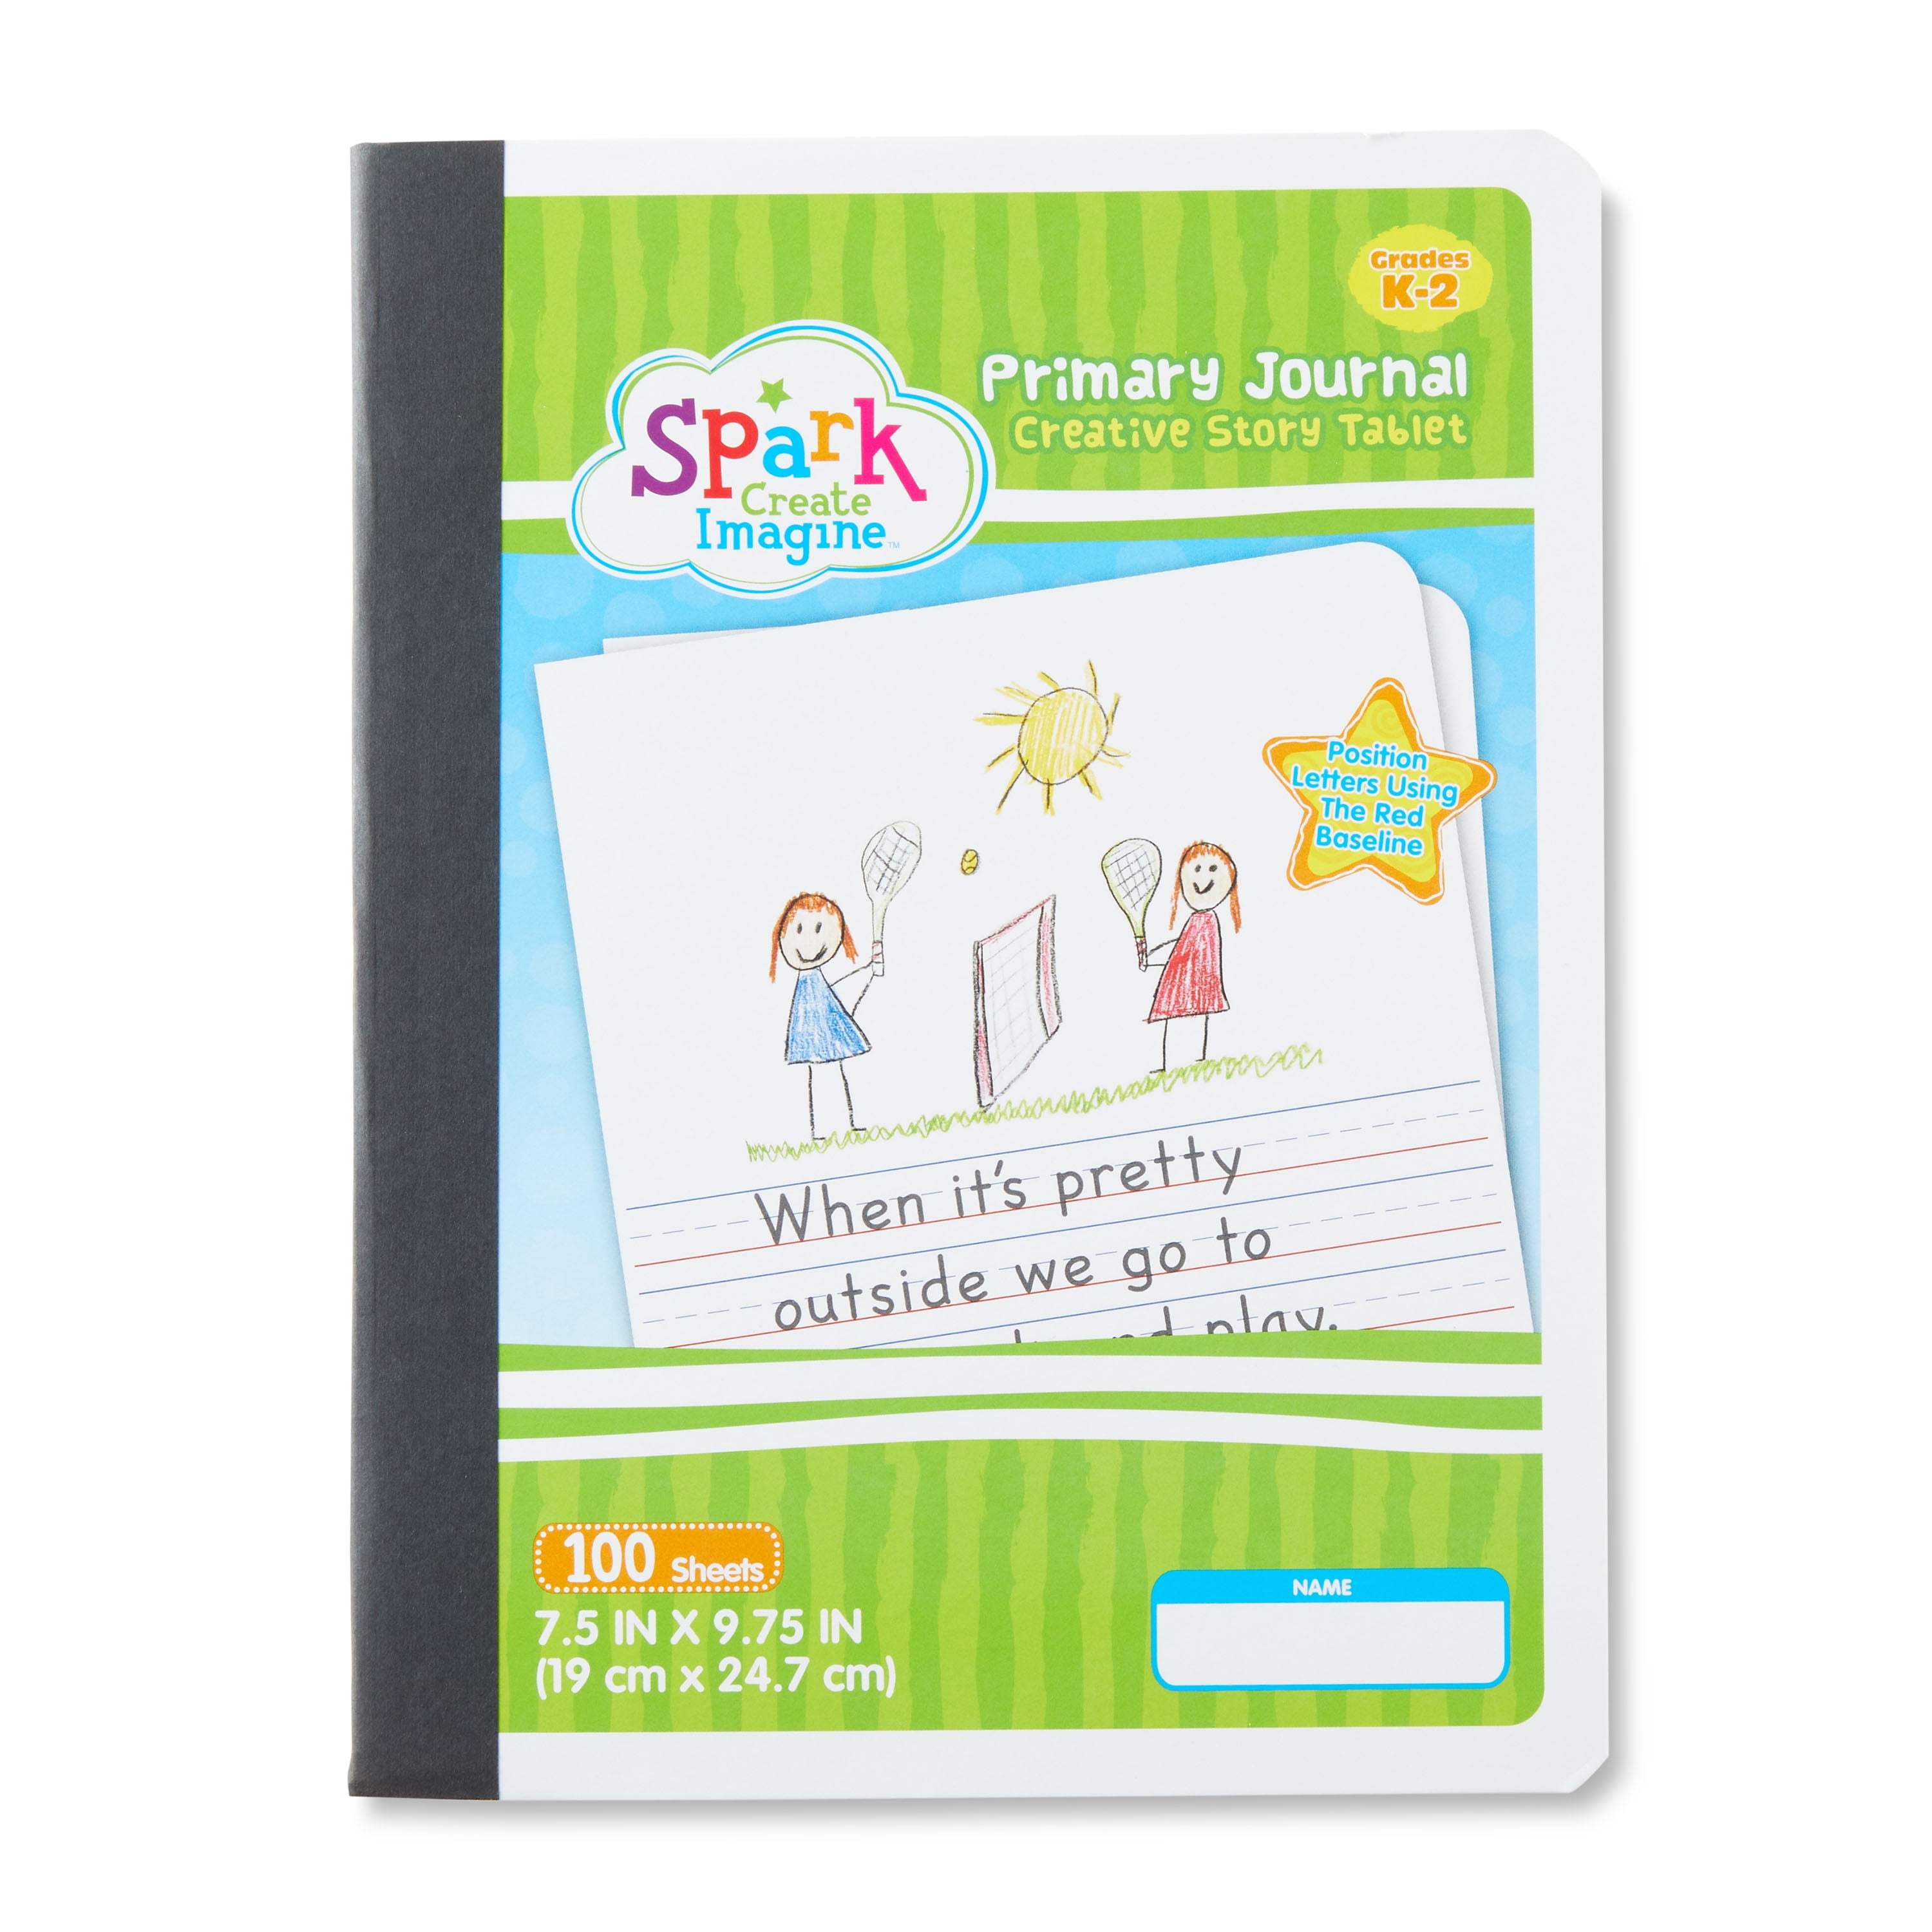 Spark Create Imagine Half Page Ruled Primary Journal, Grades K-2, 100 Pages  (09644)